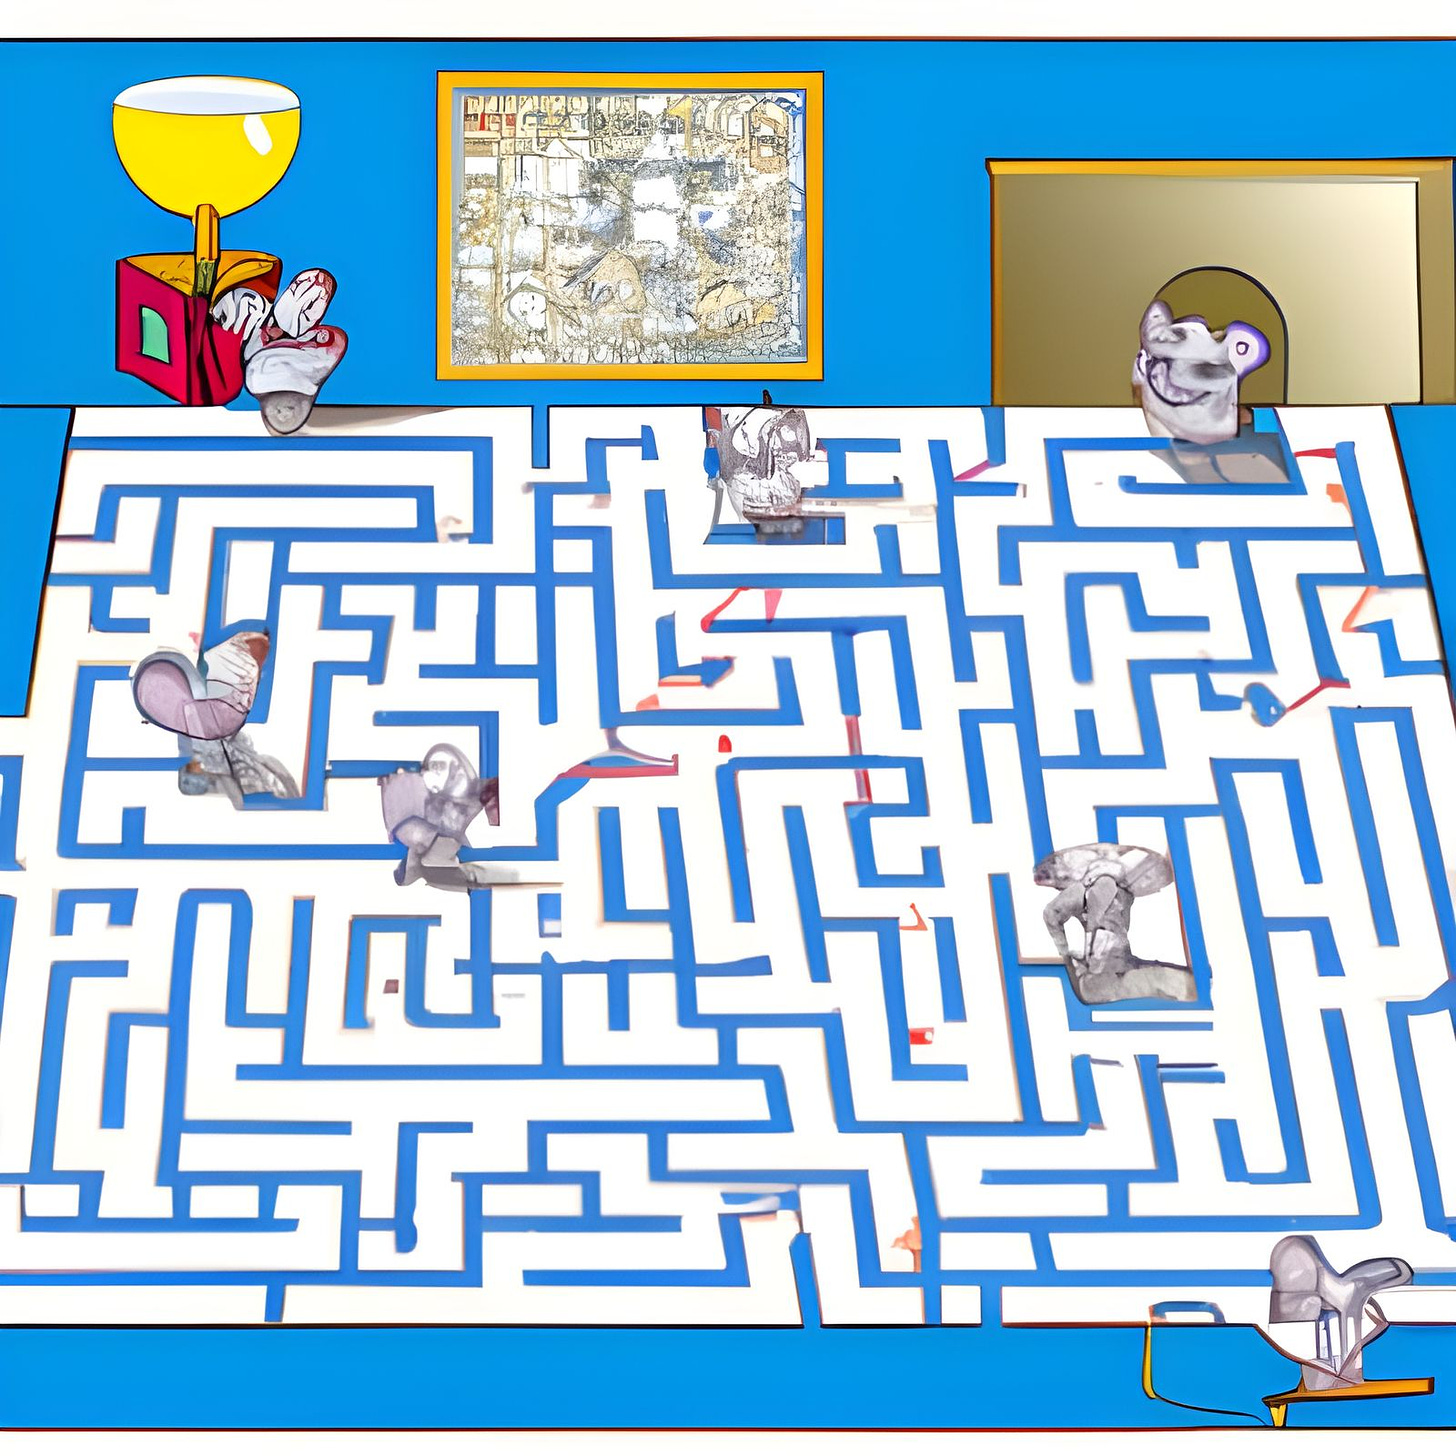 Lab rats in a game of mazes